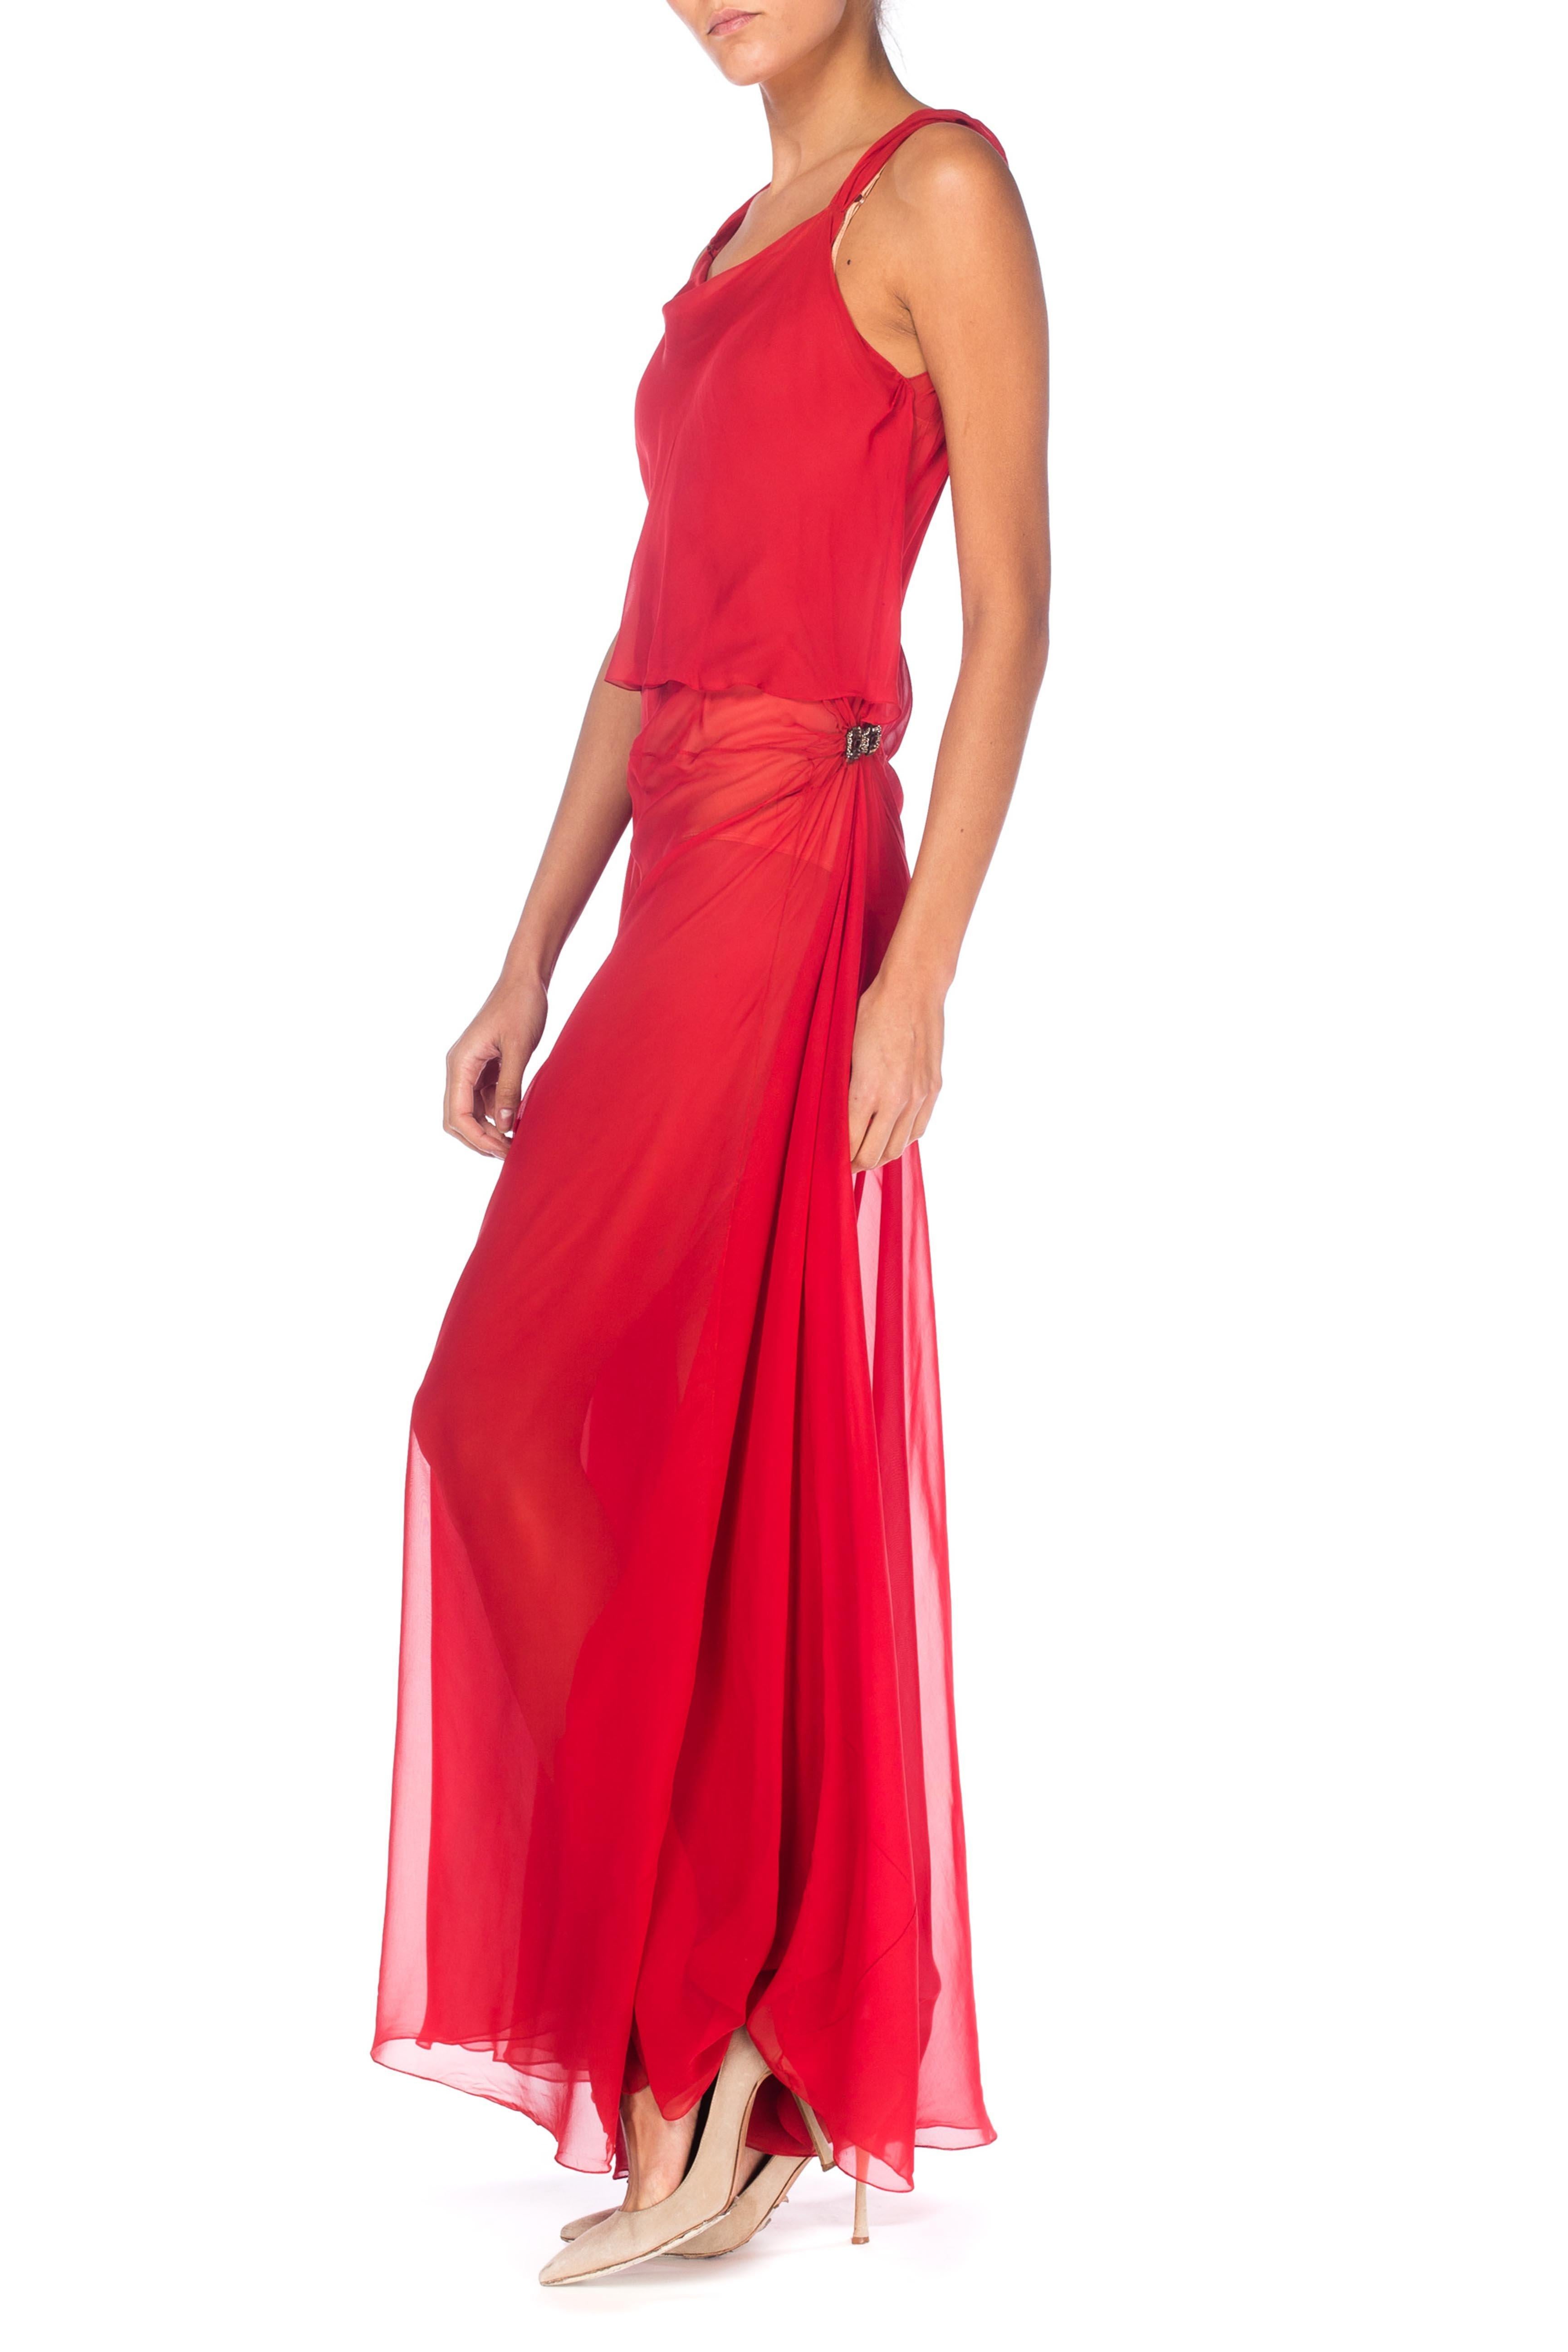 1930S Red Sheer Silk Chiffon Bias-Cut Gown With Deco Clasps On Hips For Sale 4